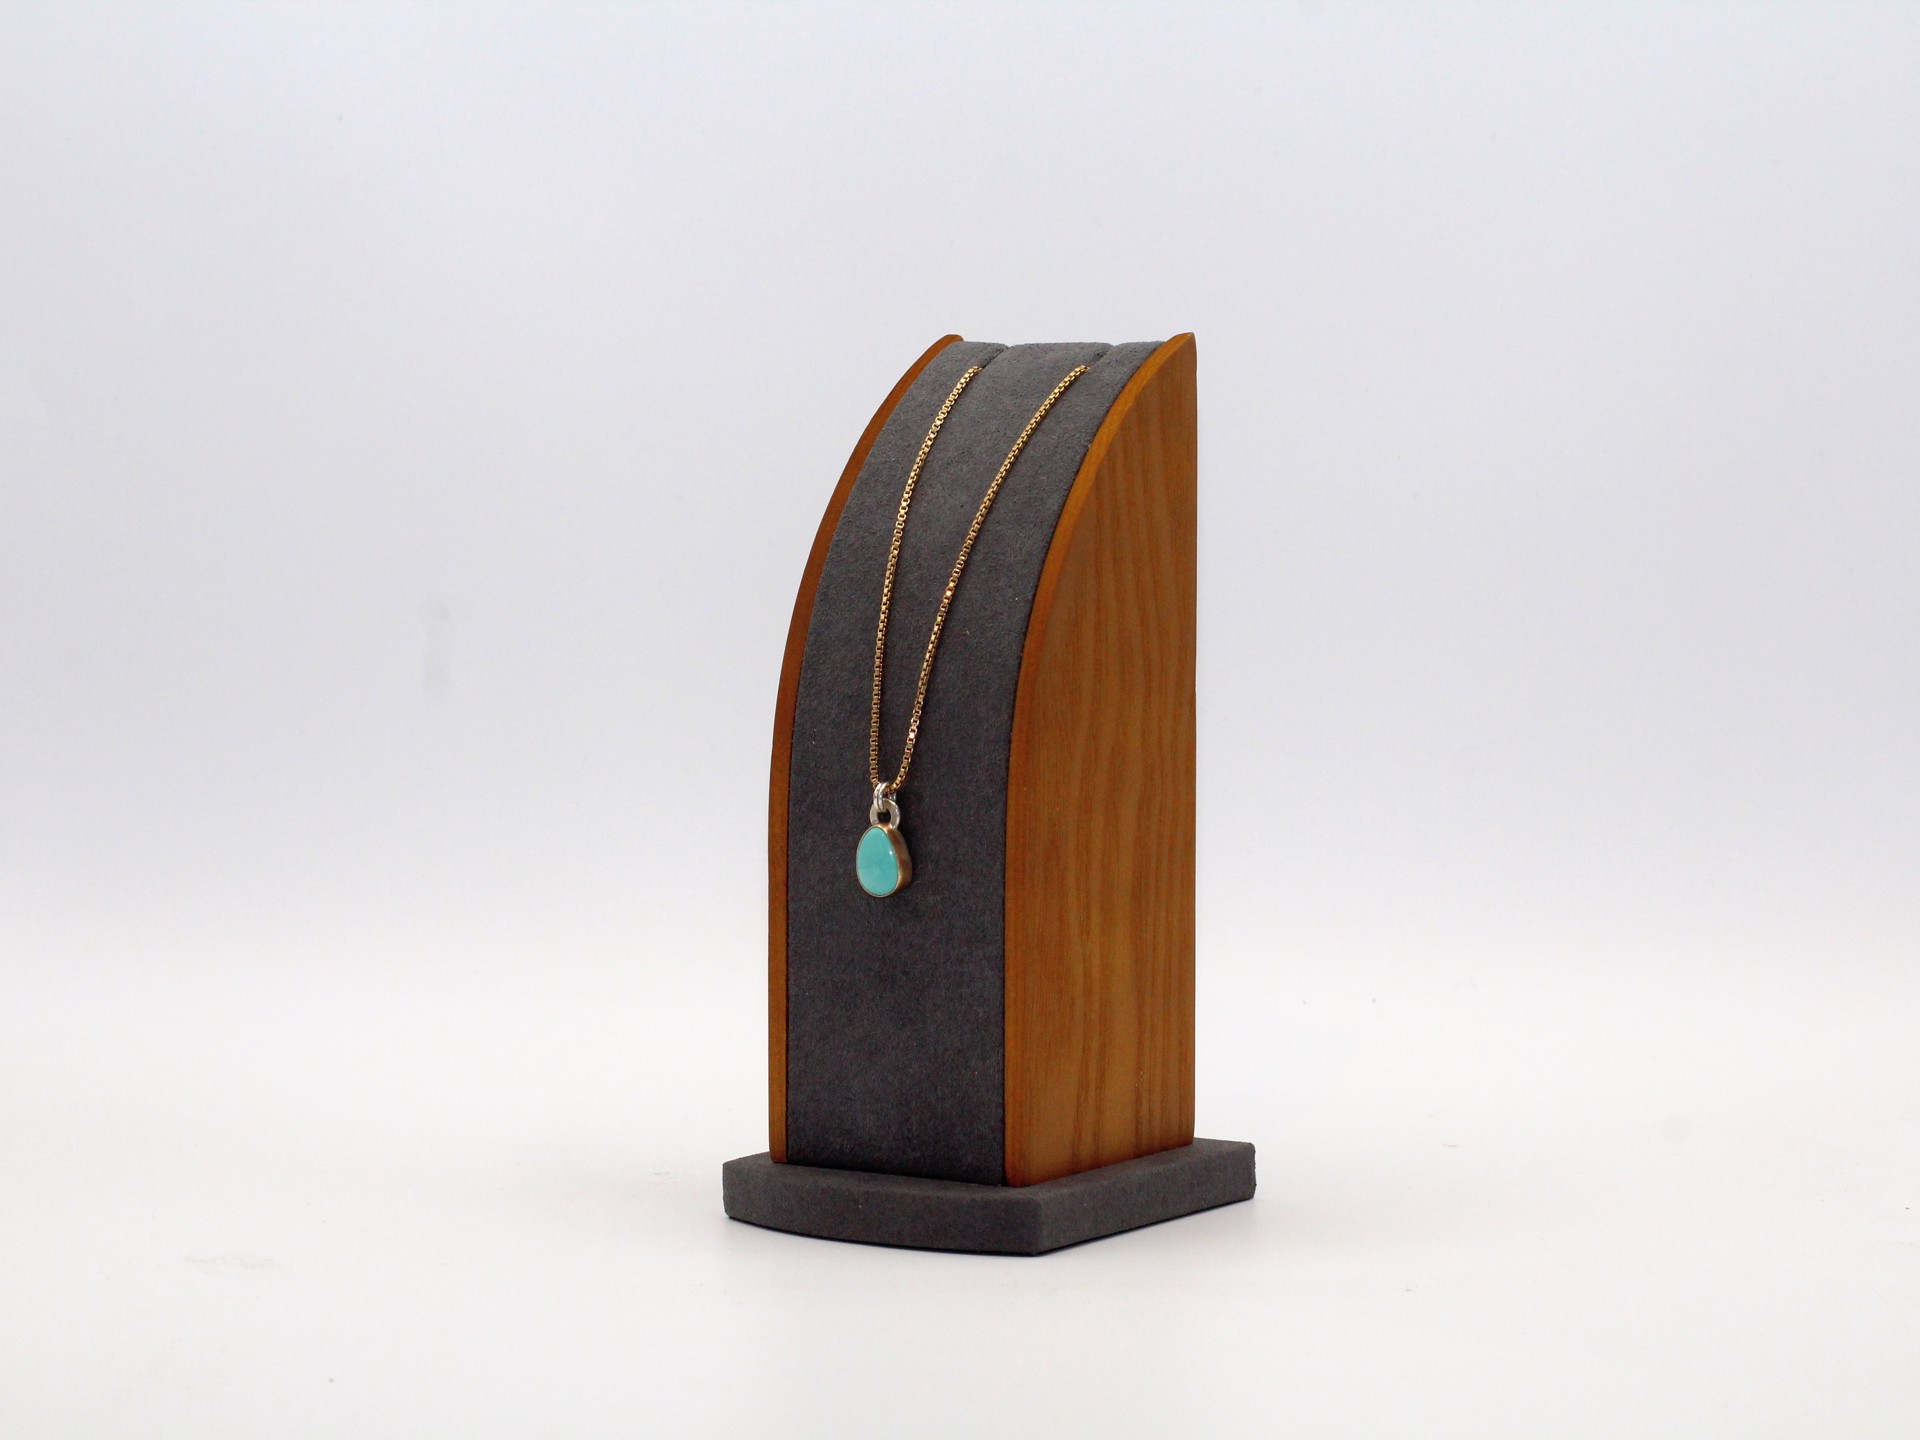 Red Mountain Turquoise Drop Necklace (set in 14k gold w/ 16" 14k gold box chain) by Emily Dubrawski